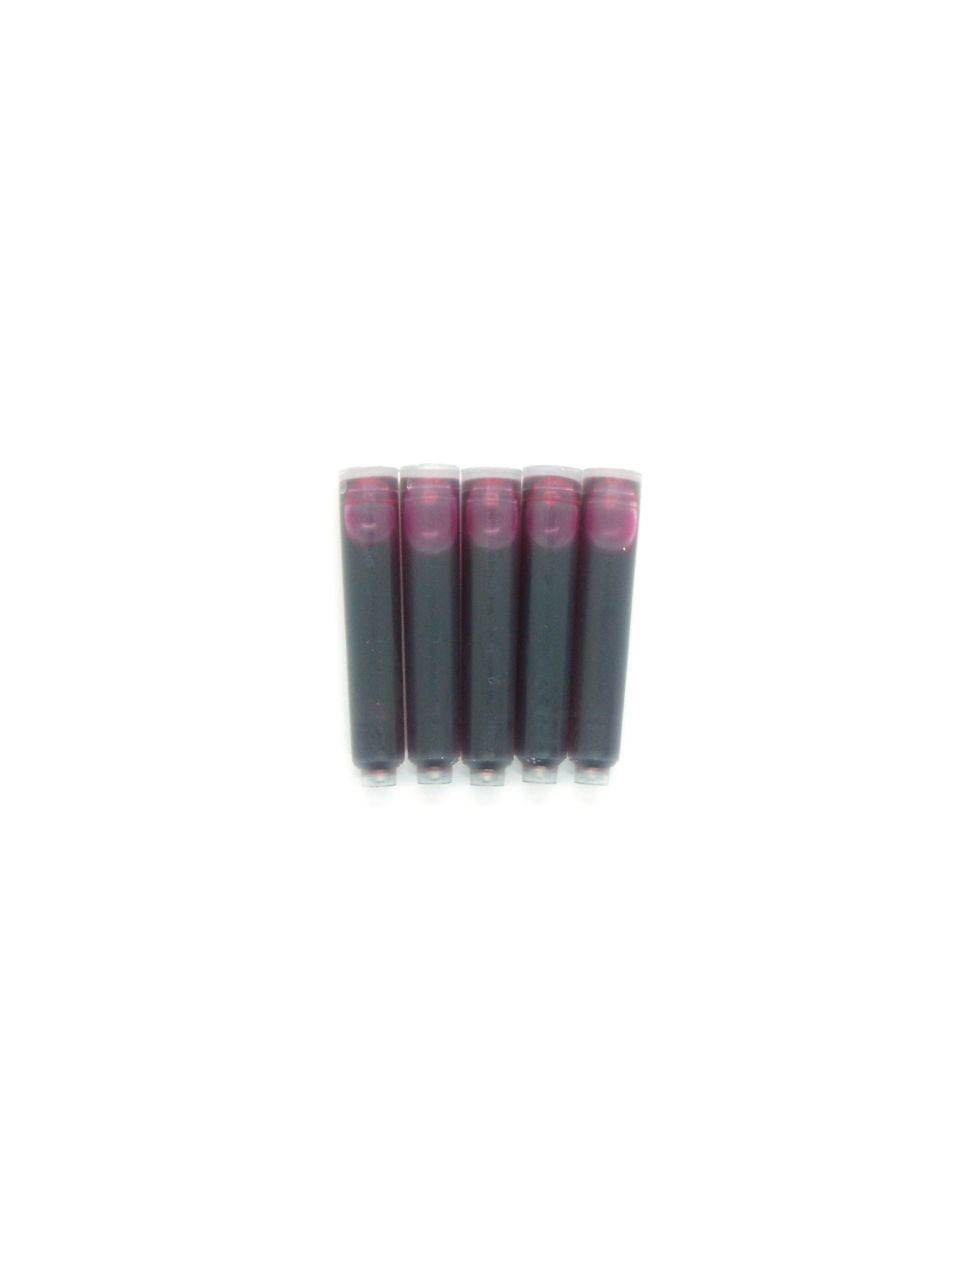 PenConverter Ink Cartridges For Montblanc Fountain Pens (Pink)